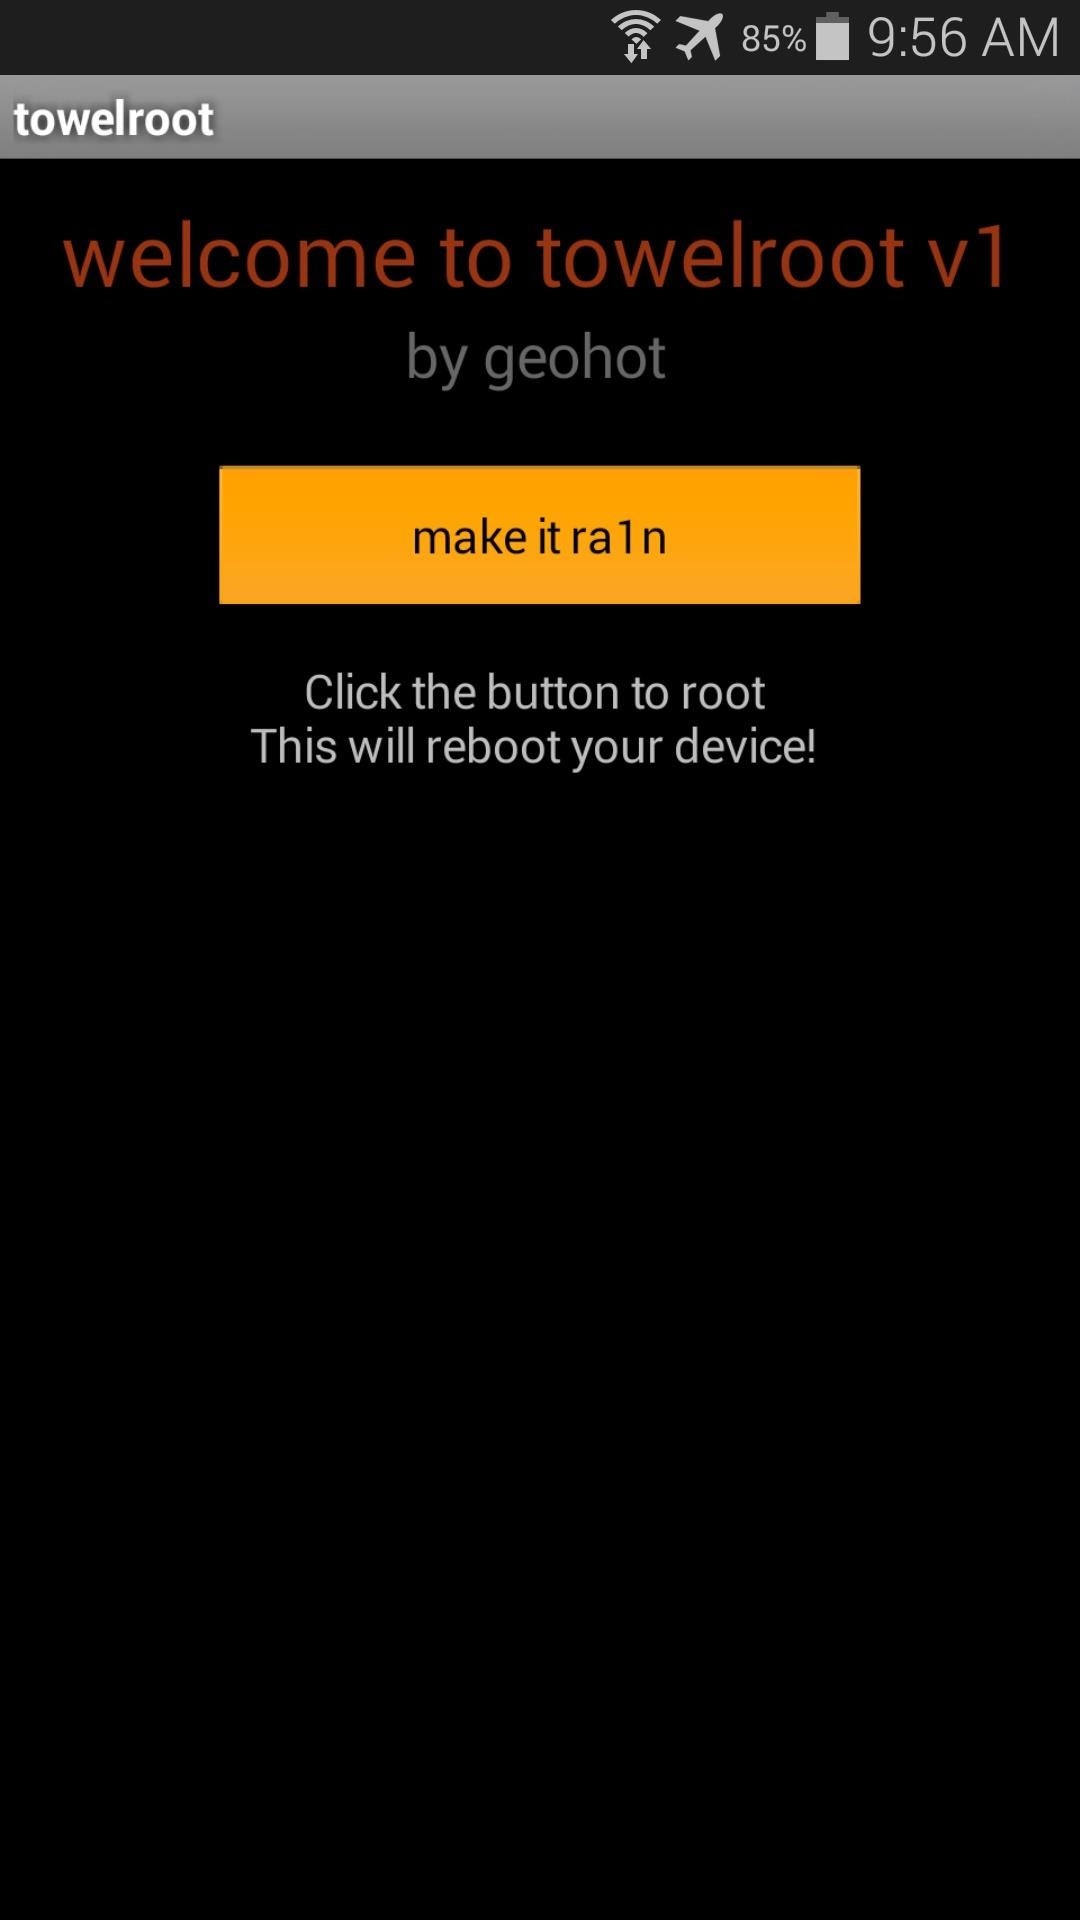 How to Root ANY Samsung Galaxy S5 Variant (Even AT&T & Verizon) in 20 Seconds Flat